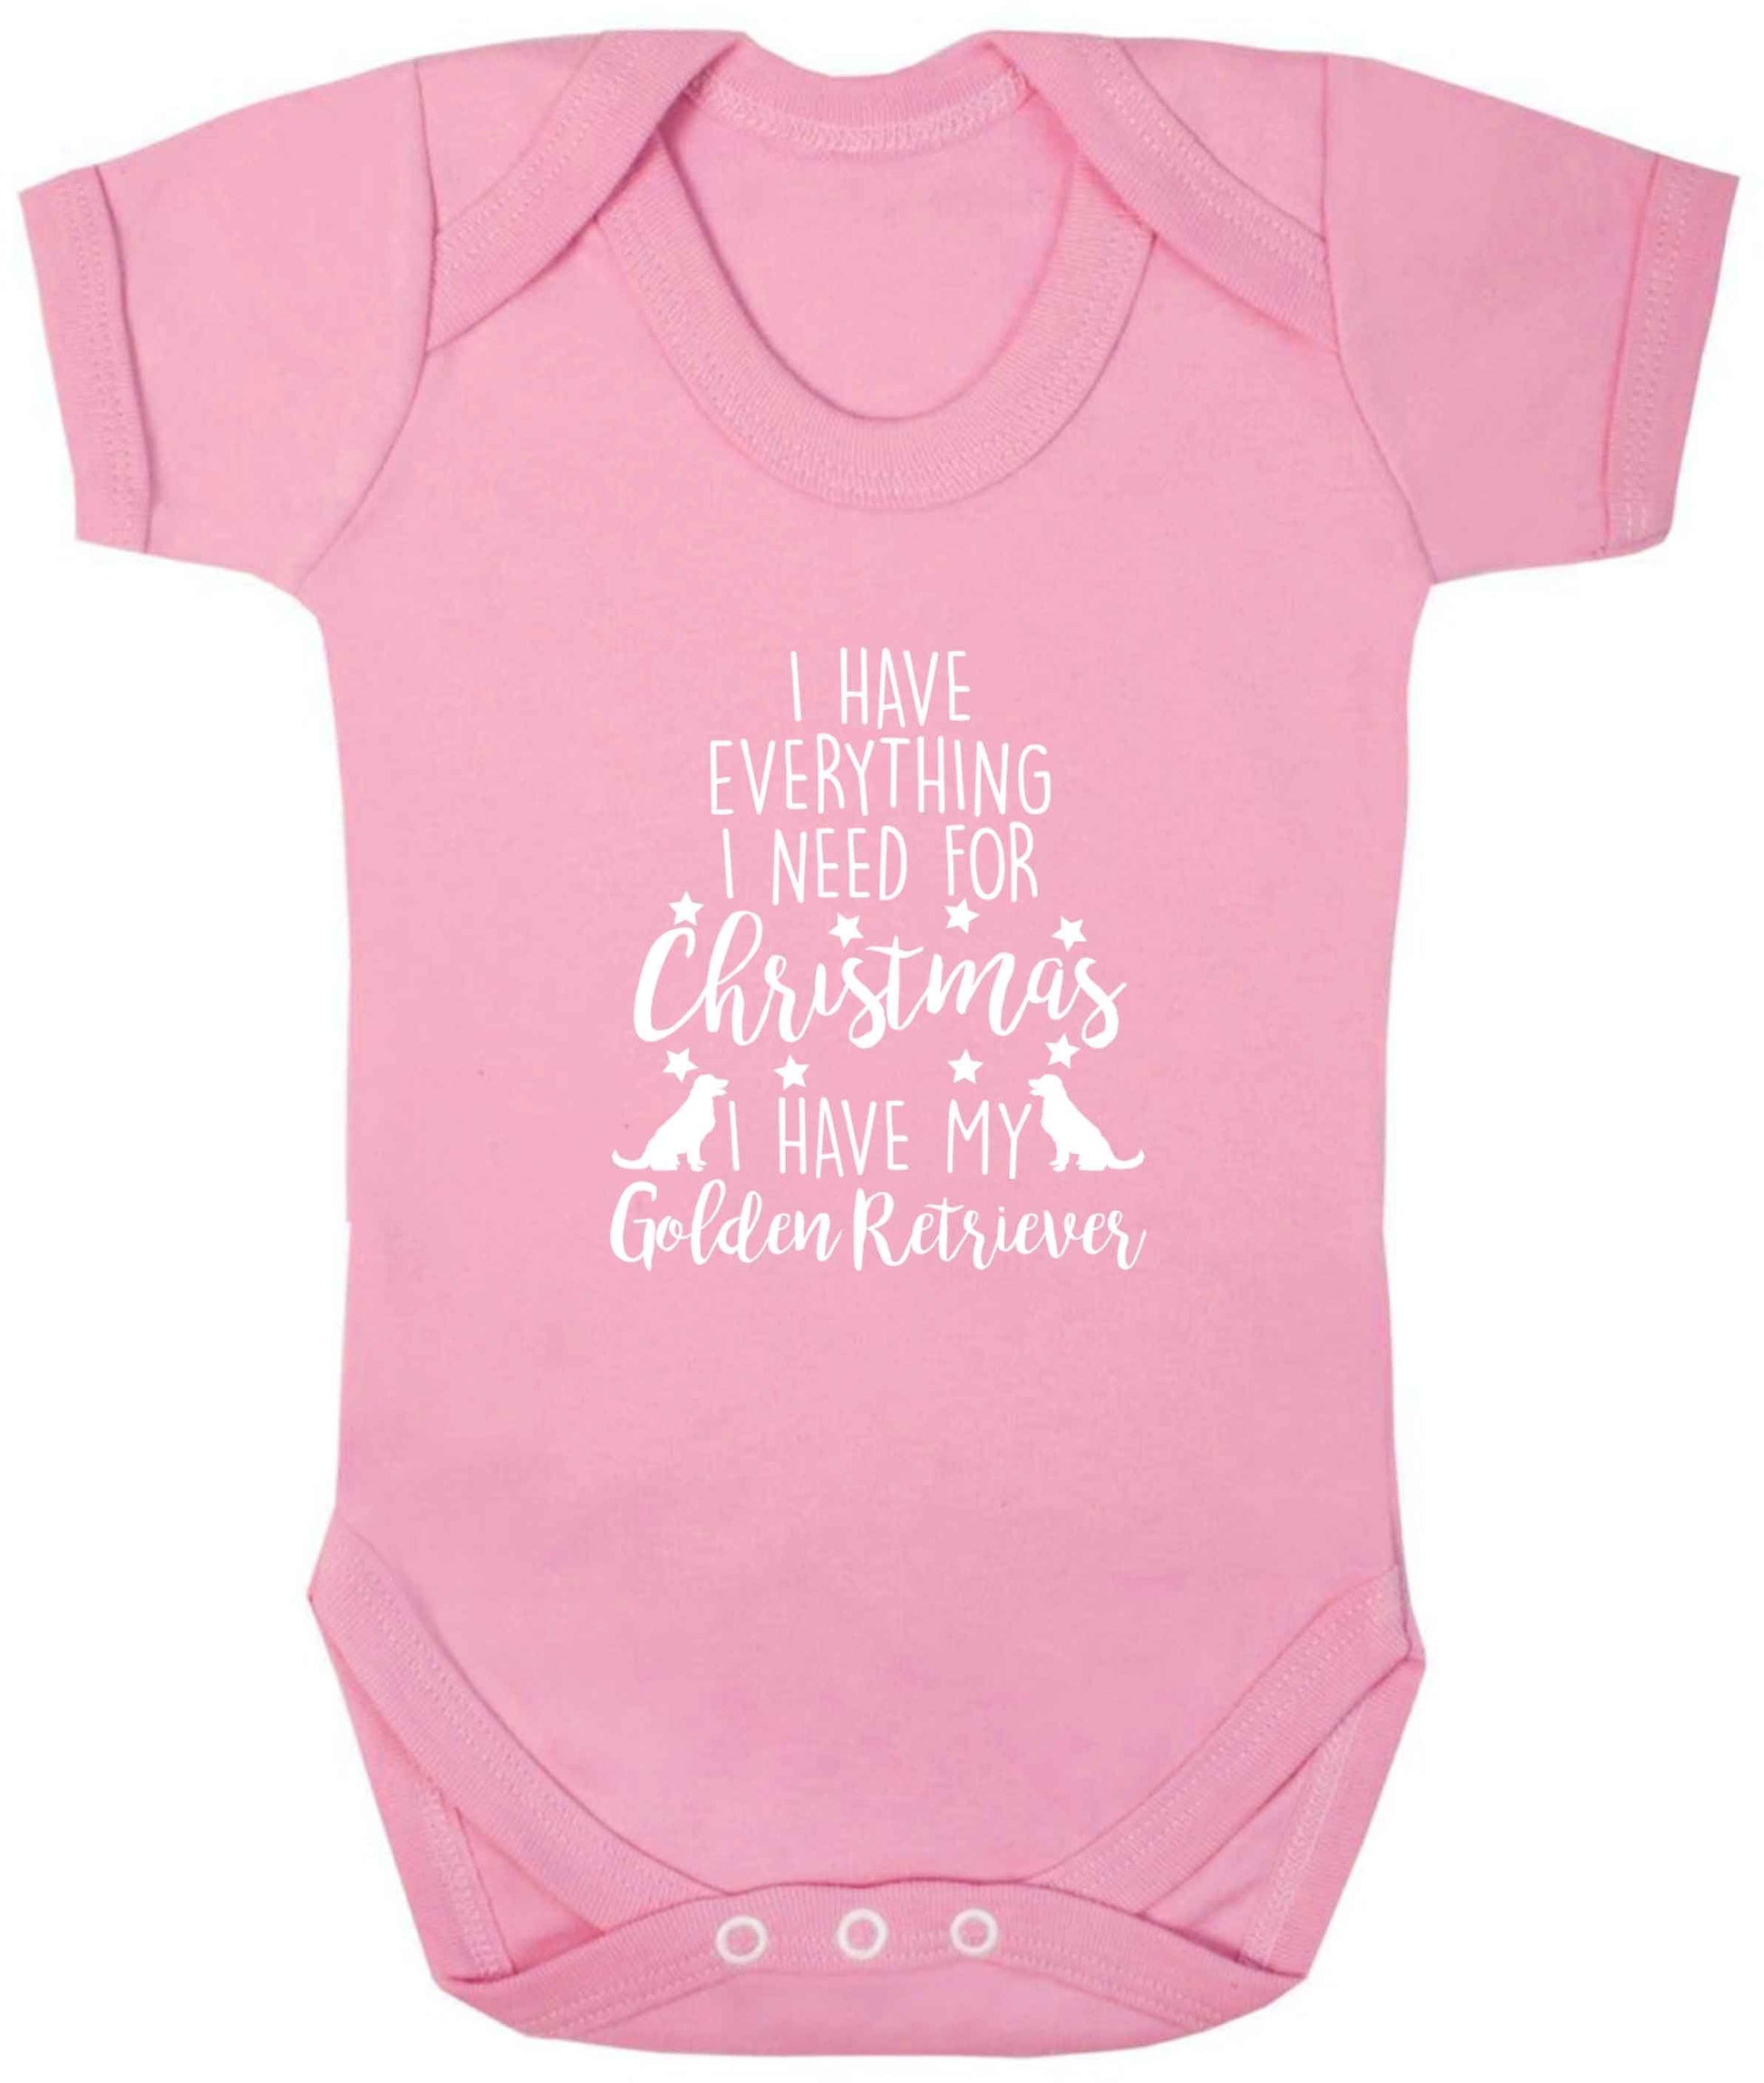 I have everything I need for Christmas I have my golden retriever baby vest pale pink 18-24 months